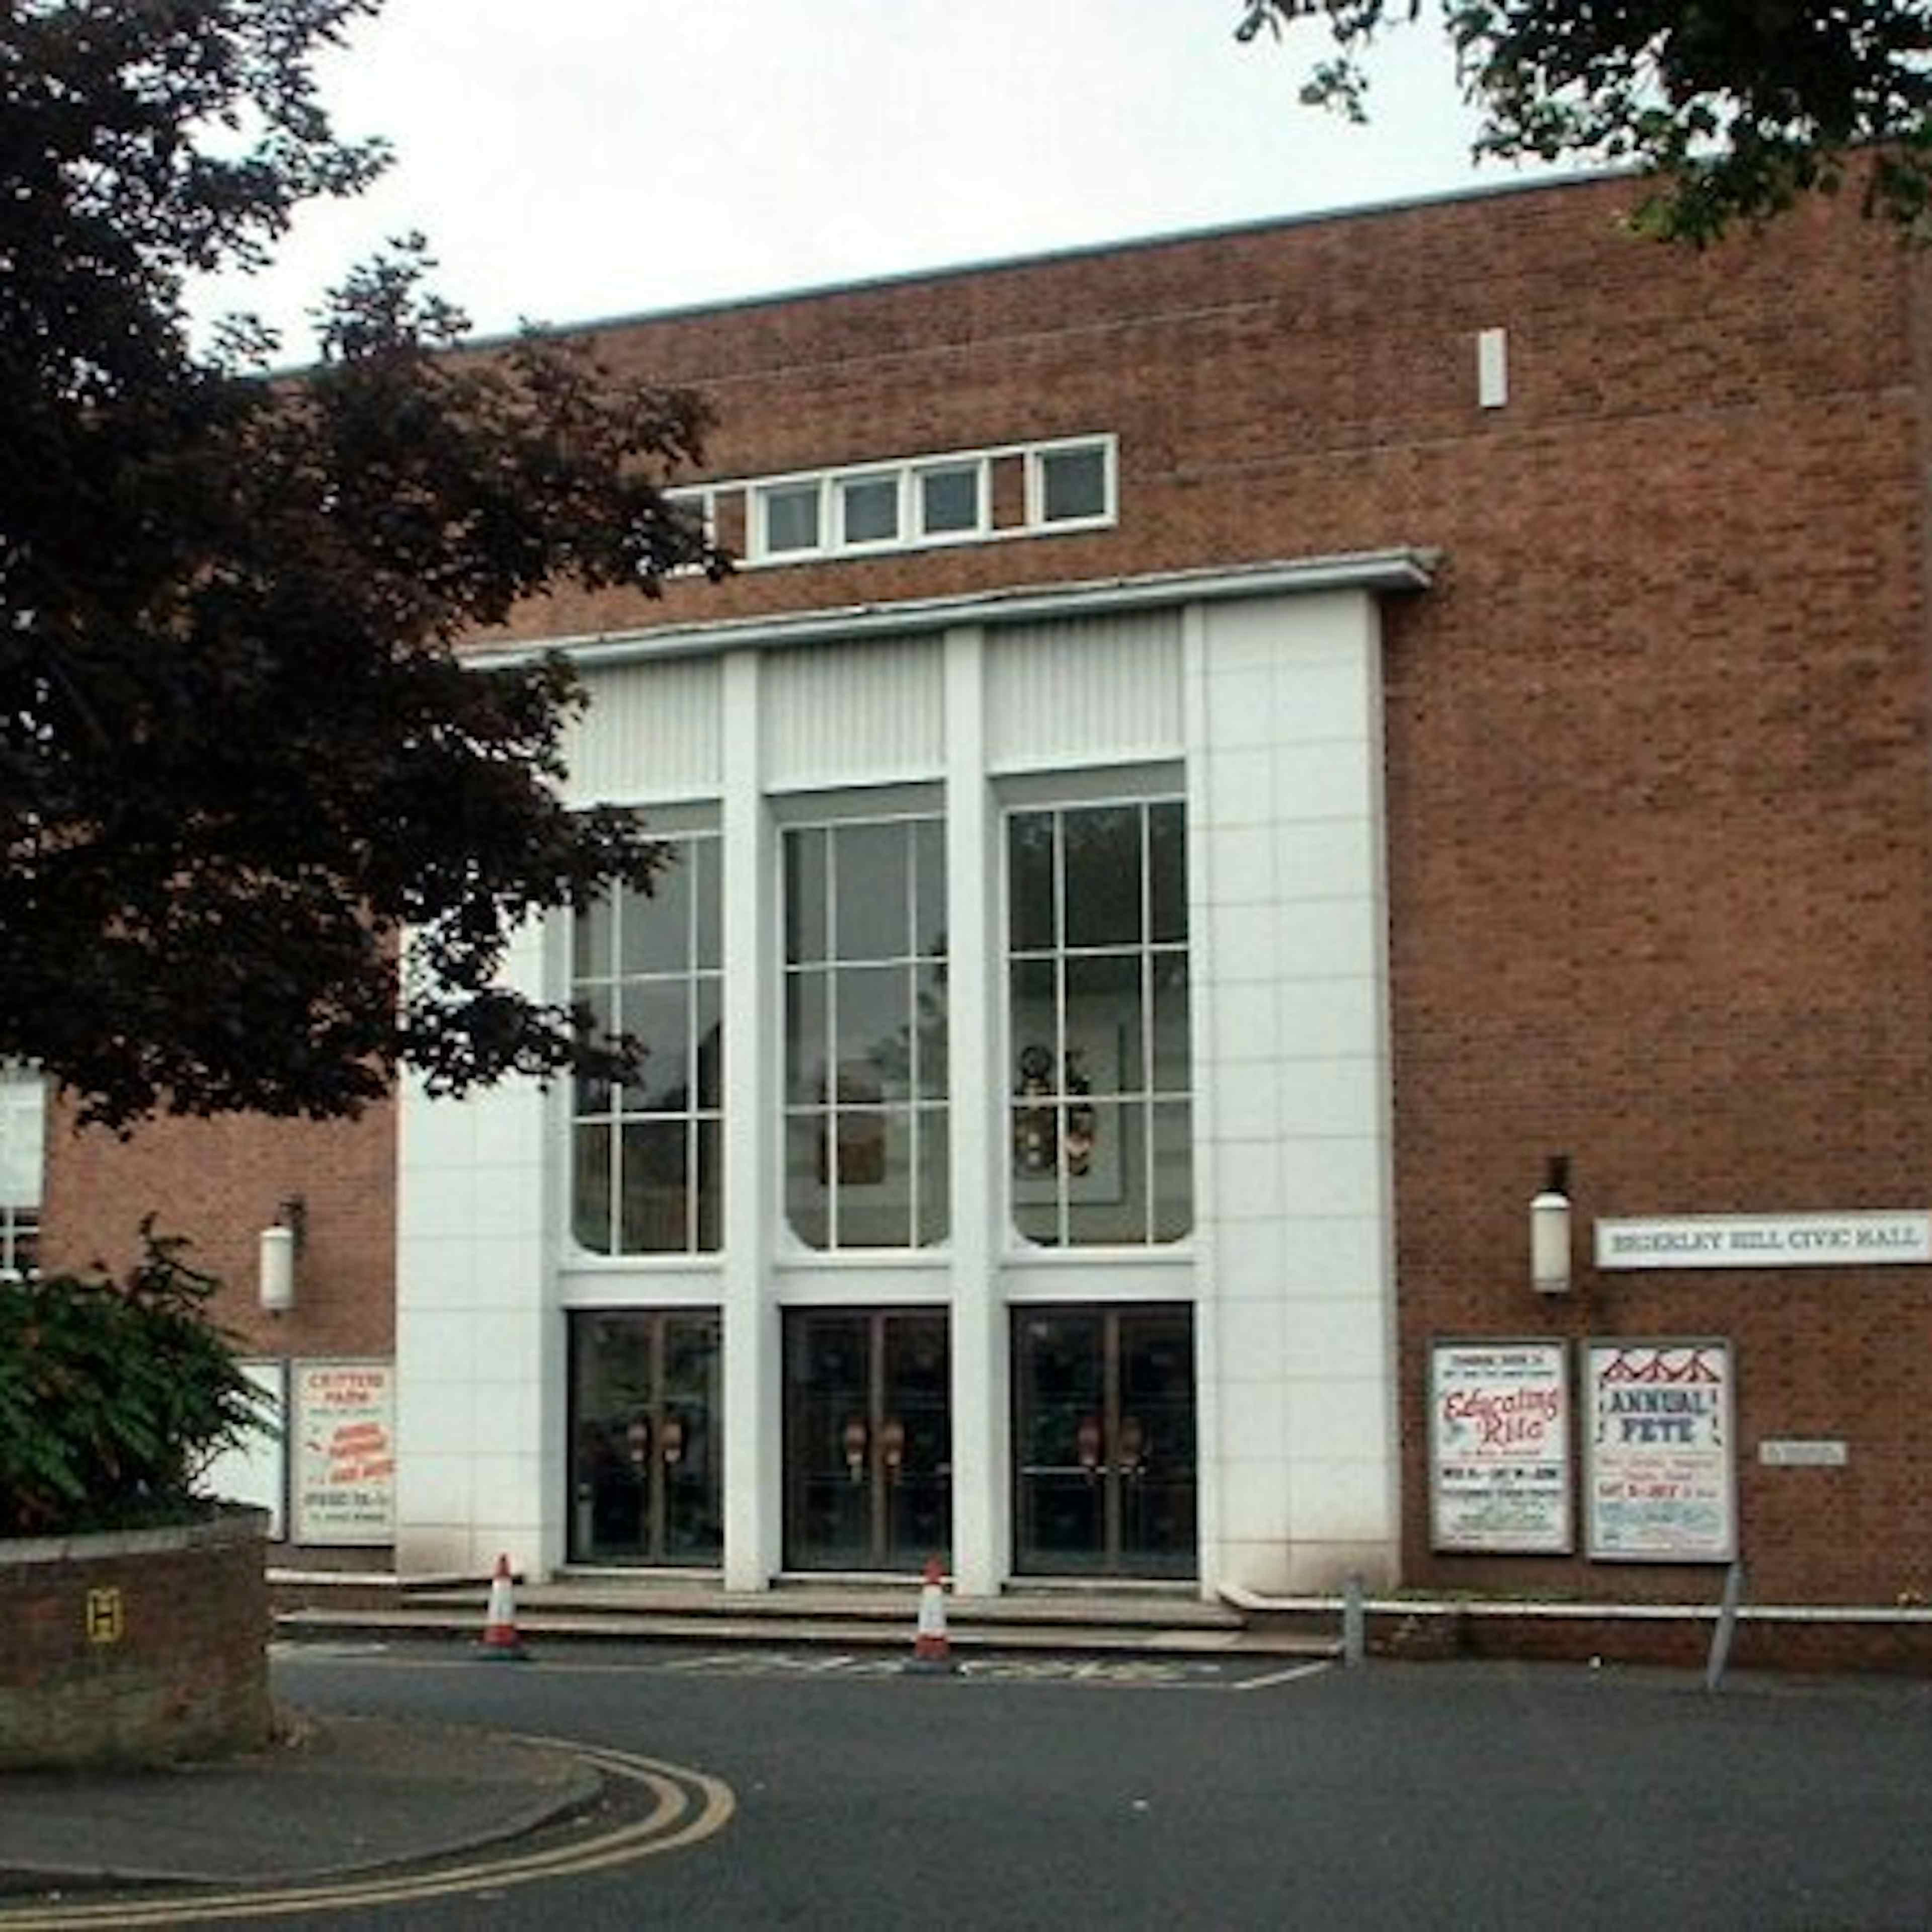 Brierley Hill Civic Hall - image 3